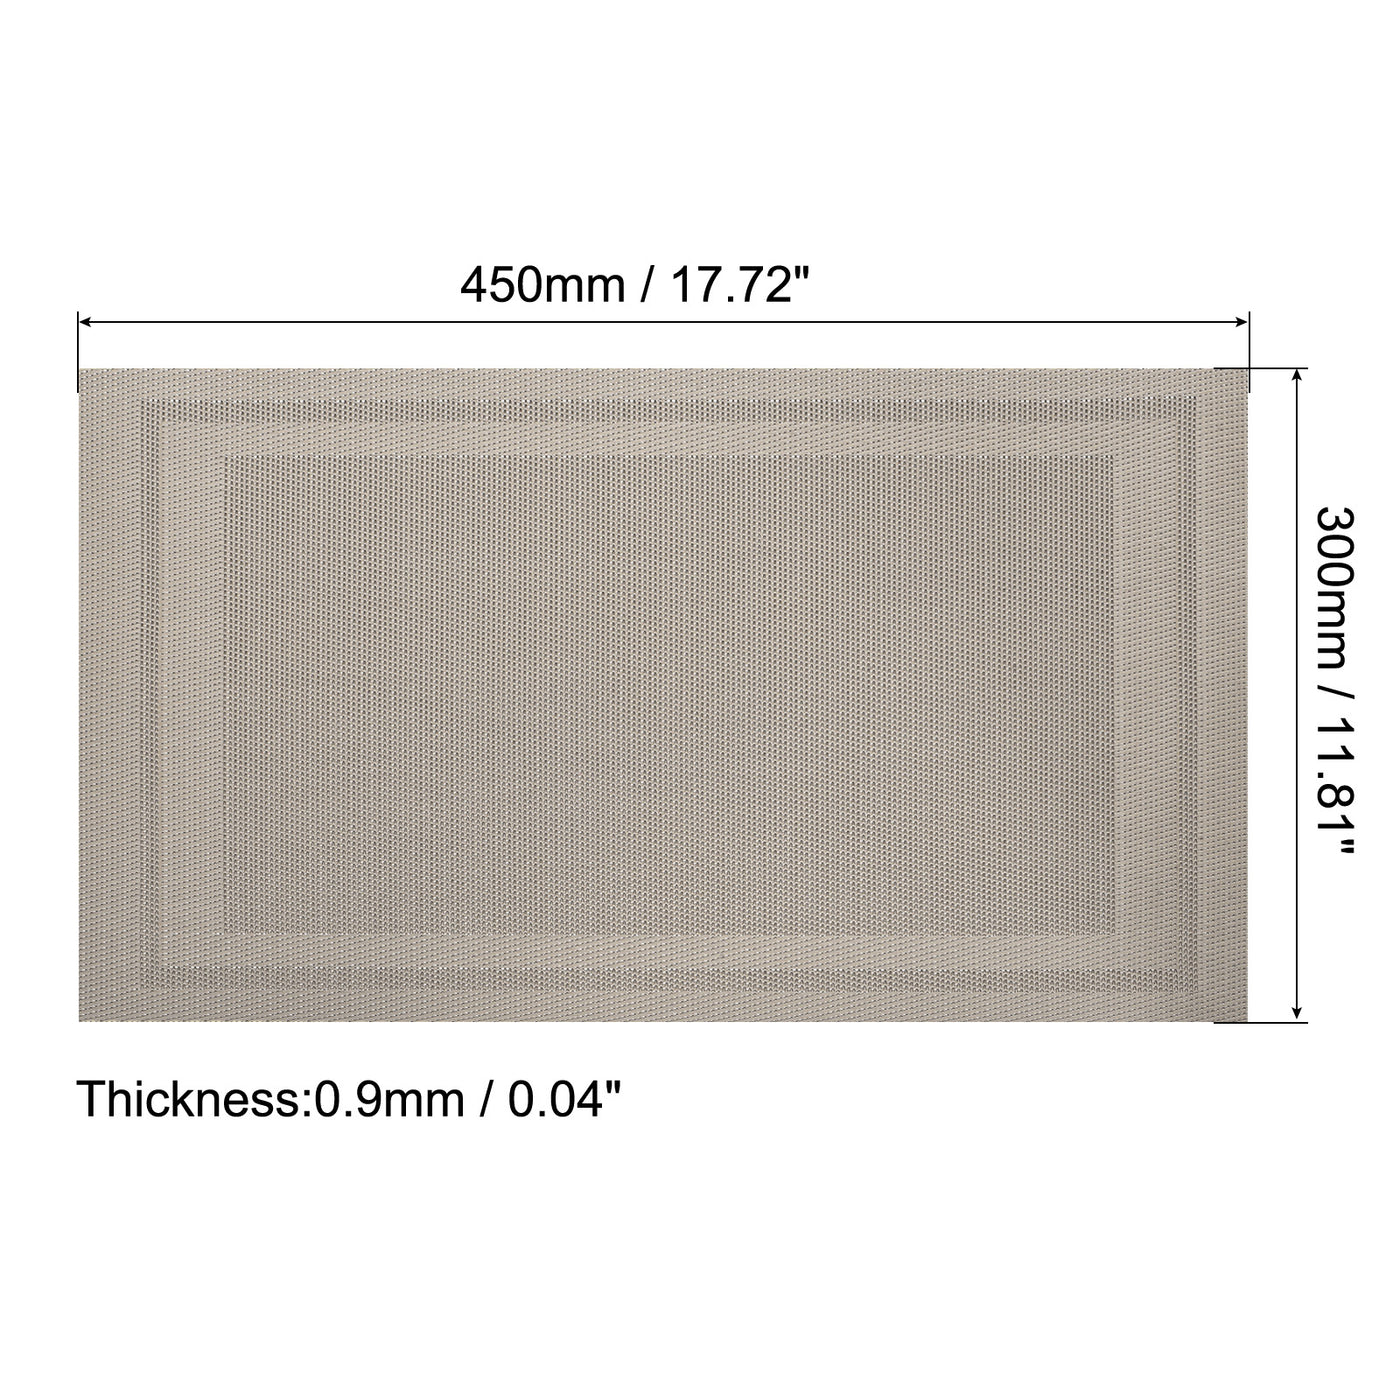 uxcell Uxcell Place Mats 450x300mm 8pcs PVC Table Washable Woven Placemat, Light Brown